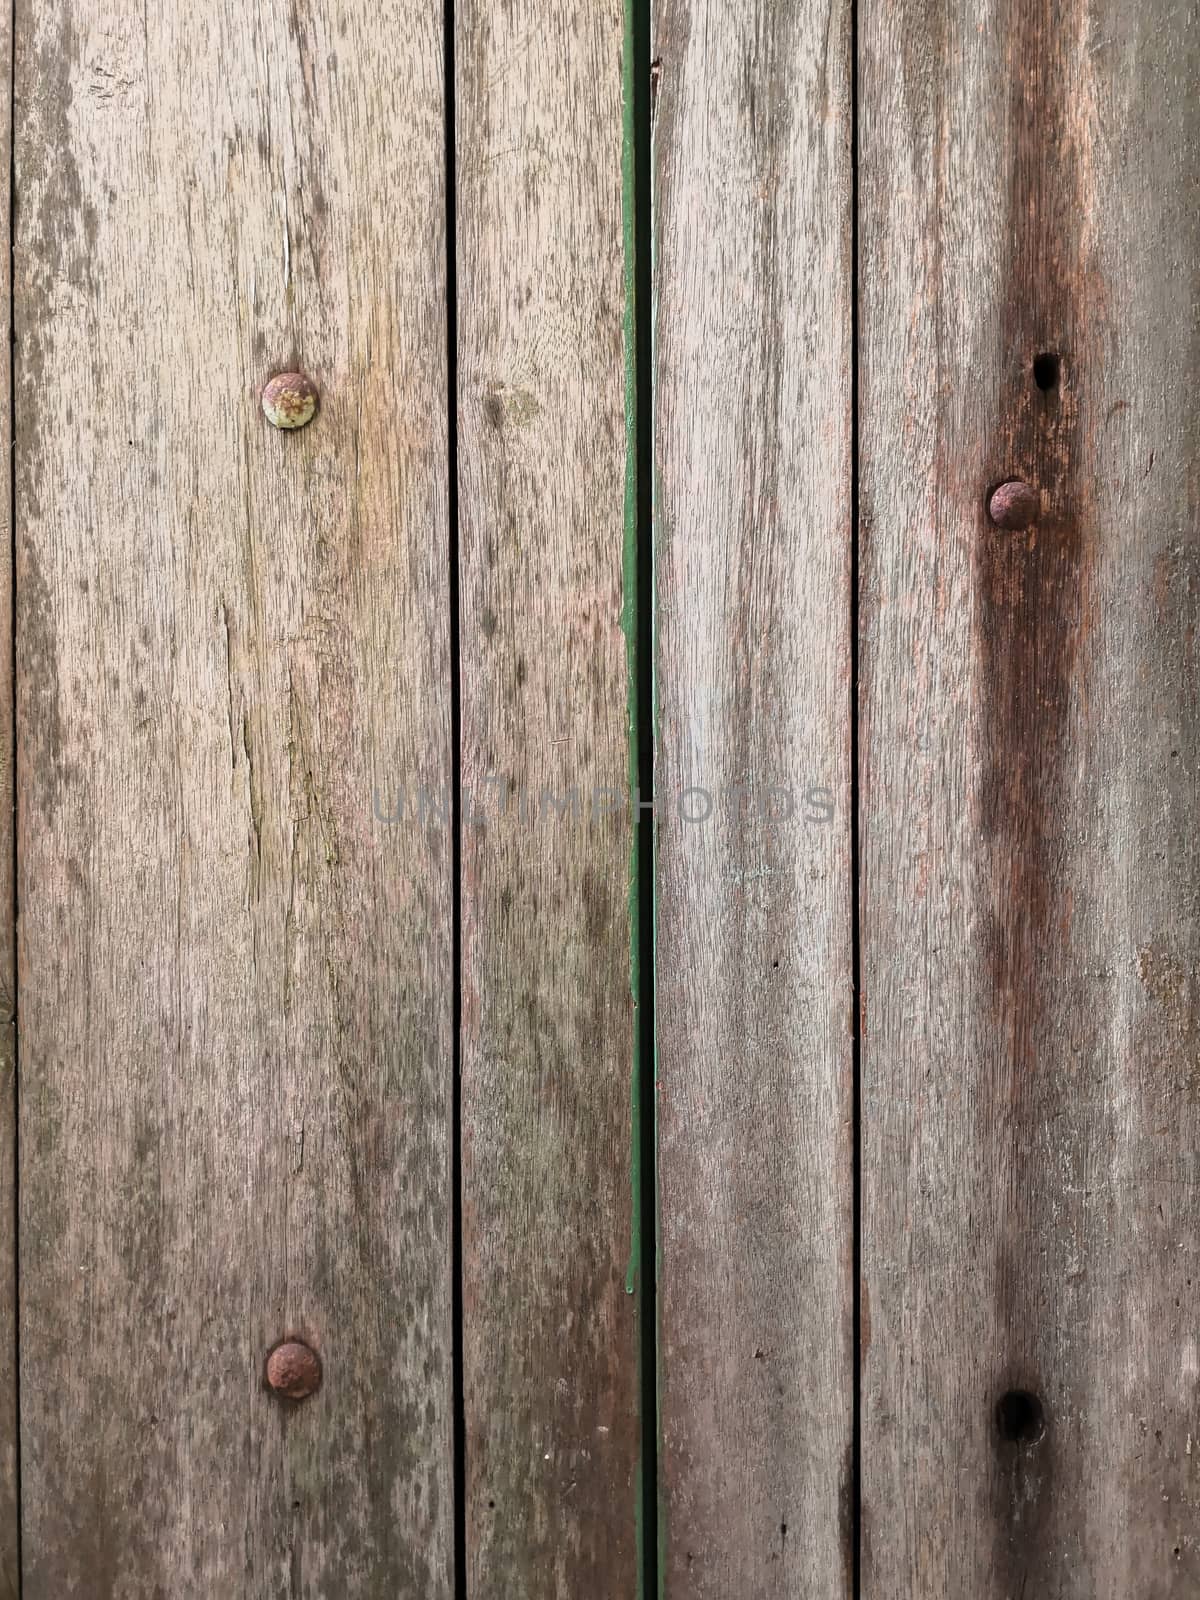 Rustic Old wooden background. wood planks - Image